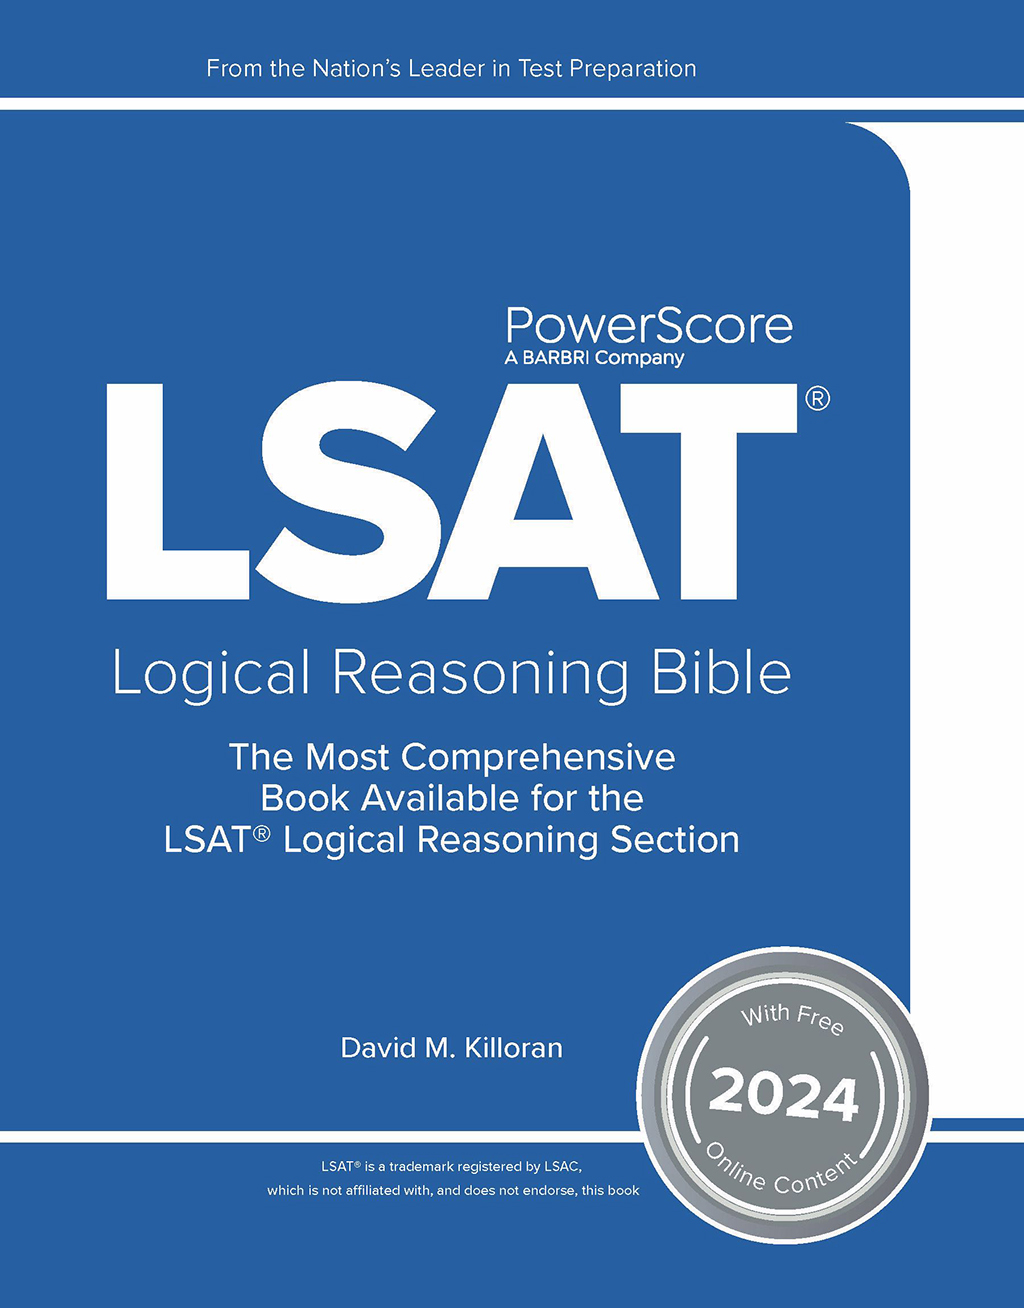 Logical Reasoning Bible front cover